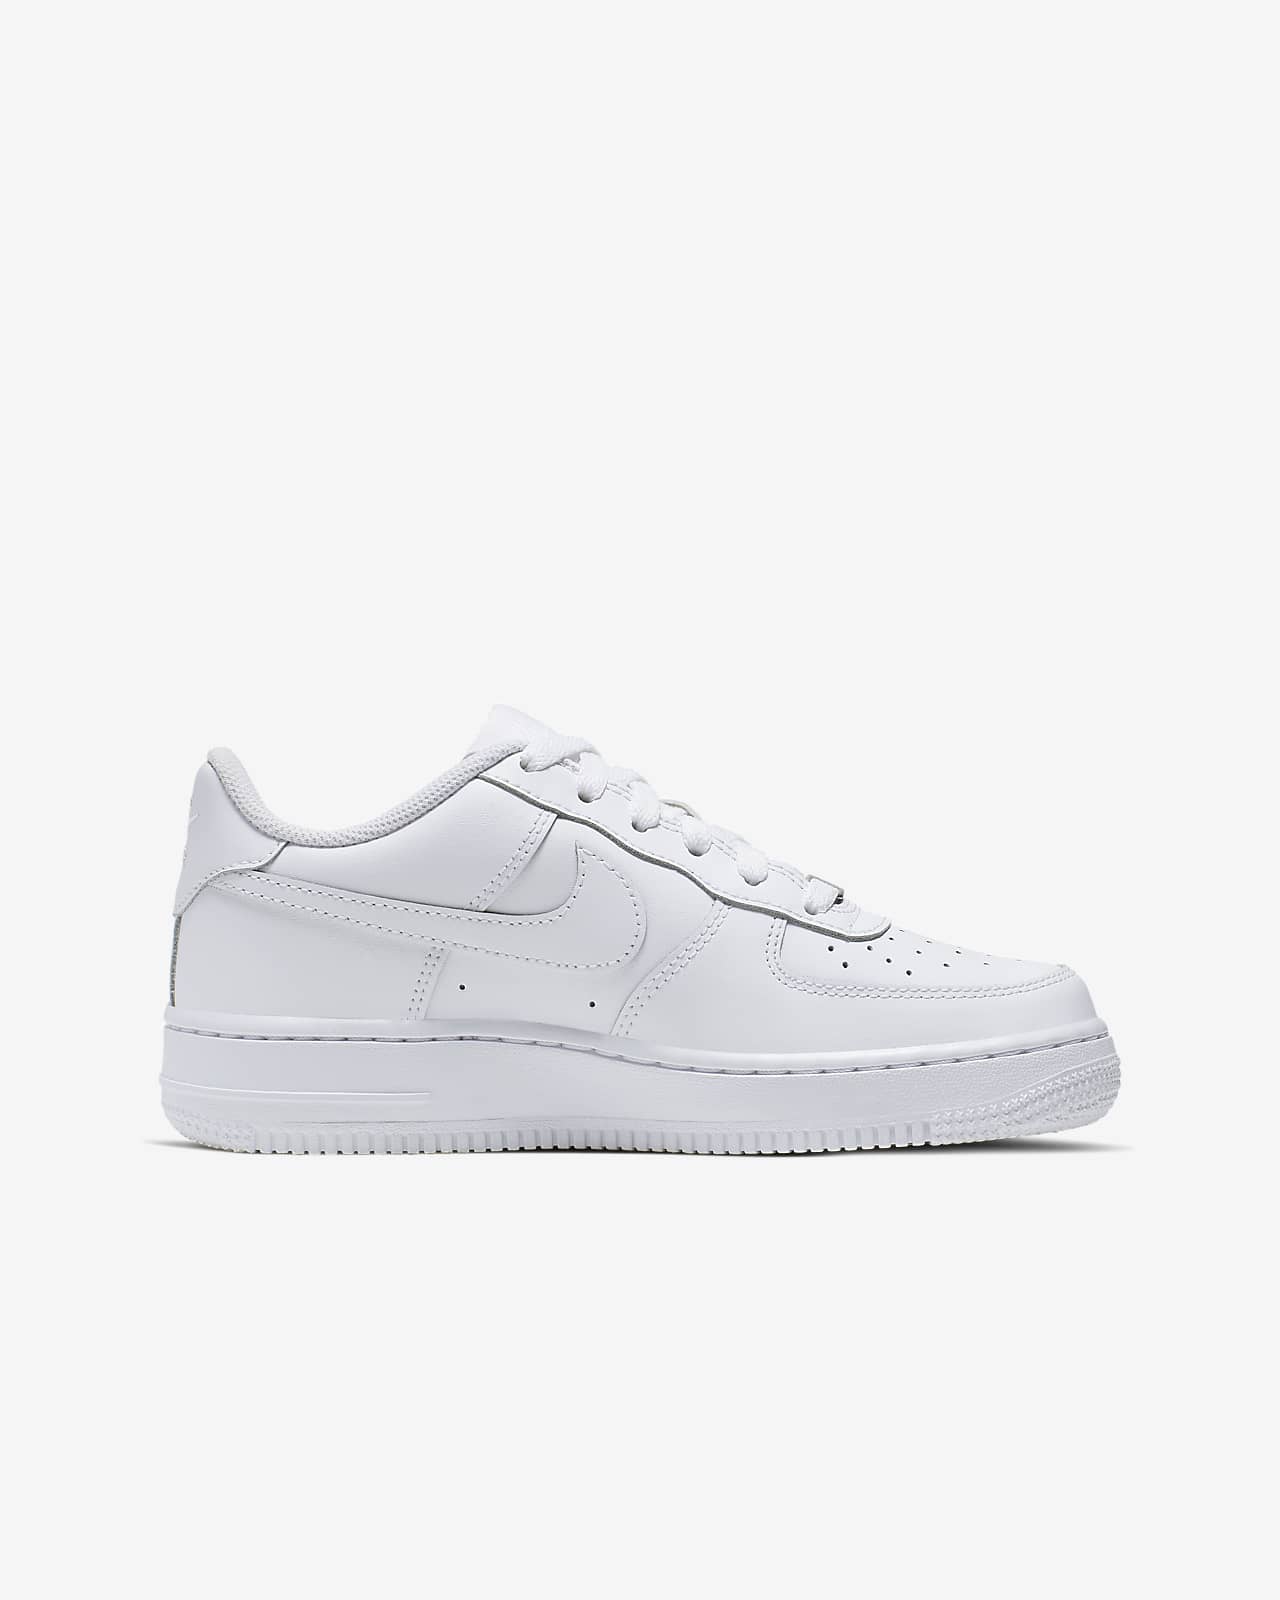 white air force junior size 6